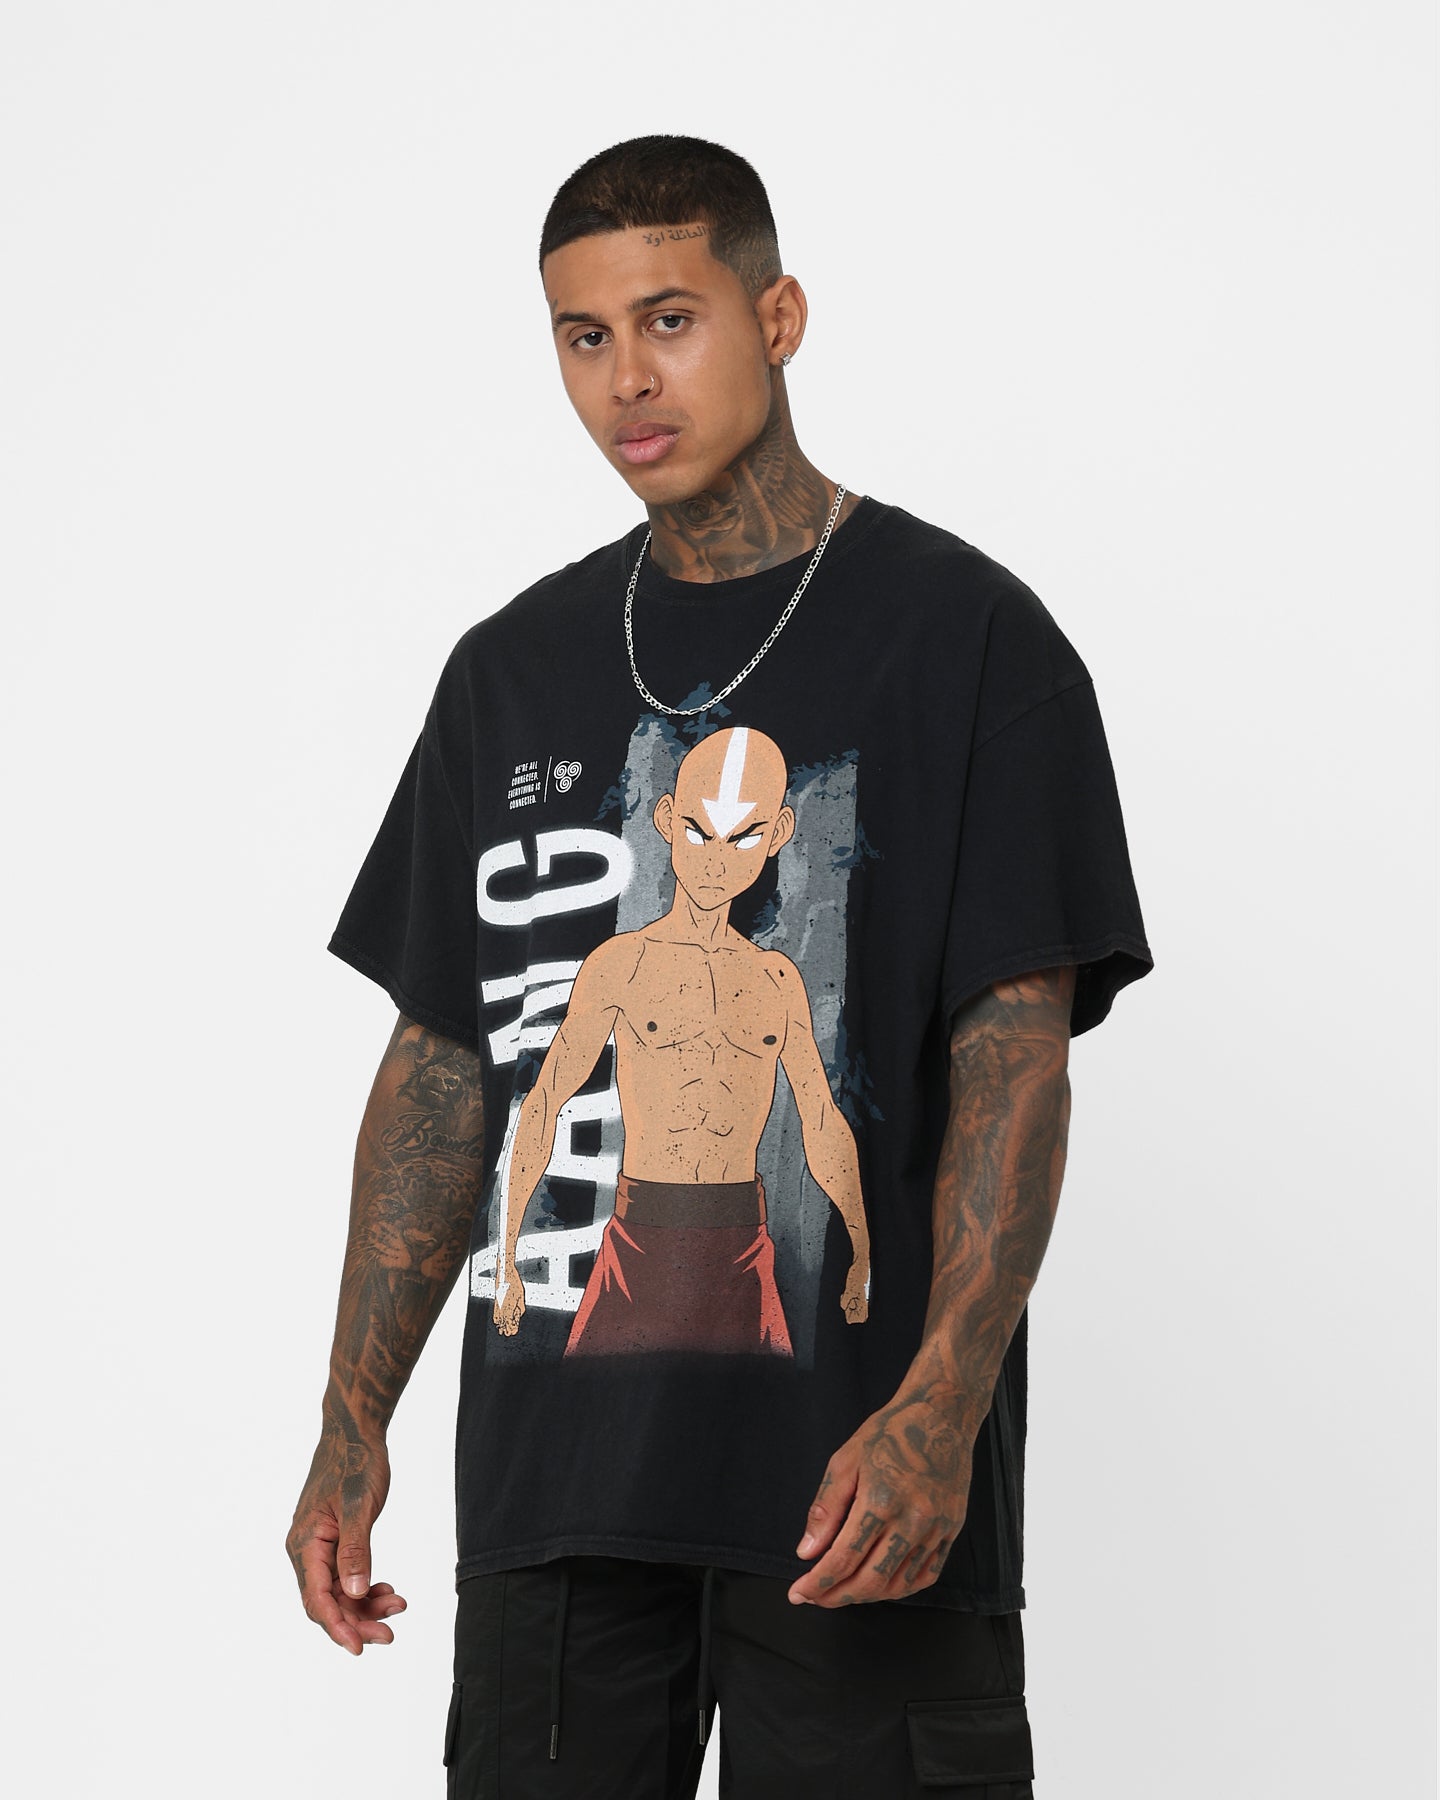 Goat Crew X Avatar: The Last Airbender Aang Vintage T-Shirt